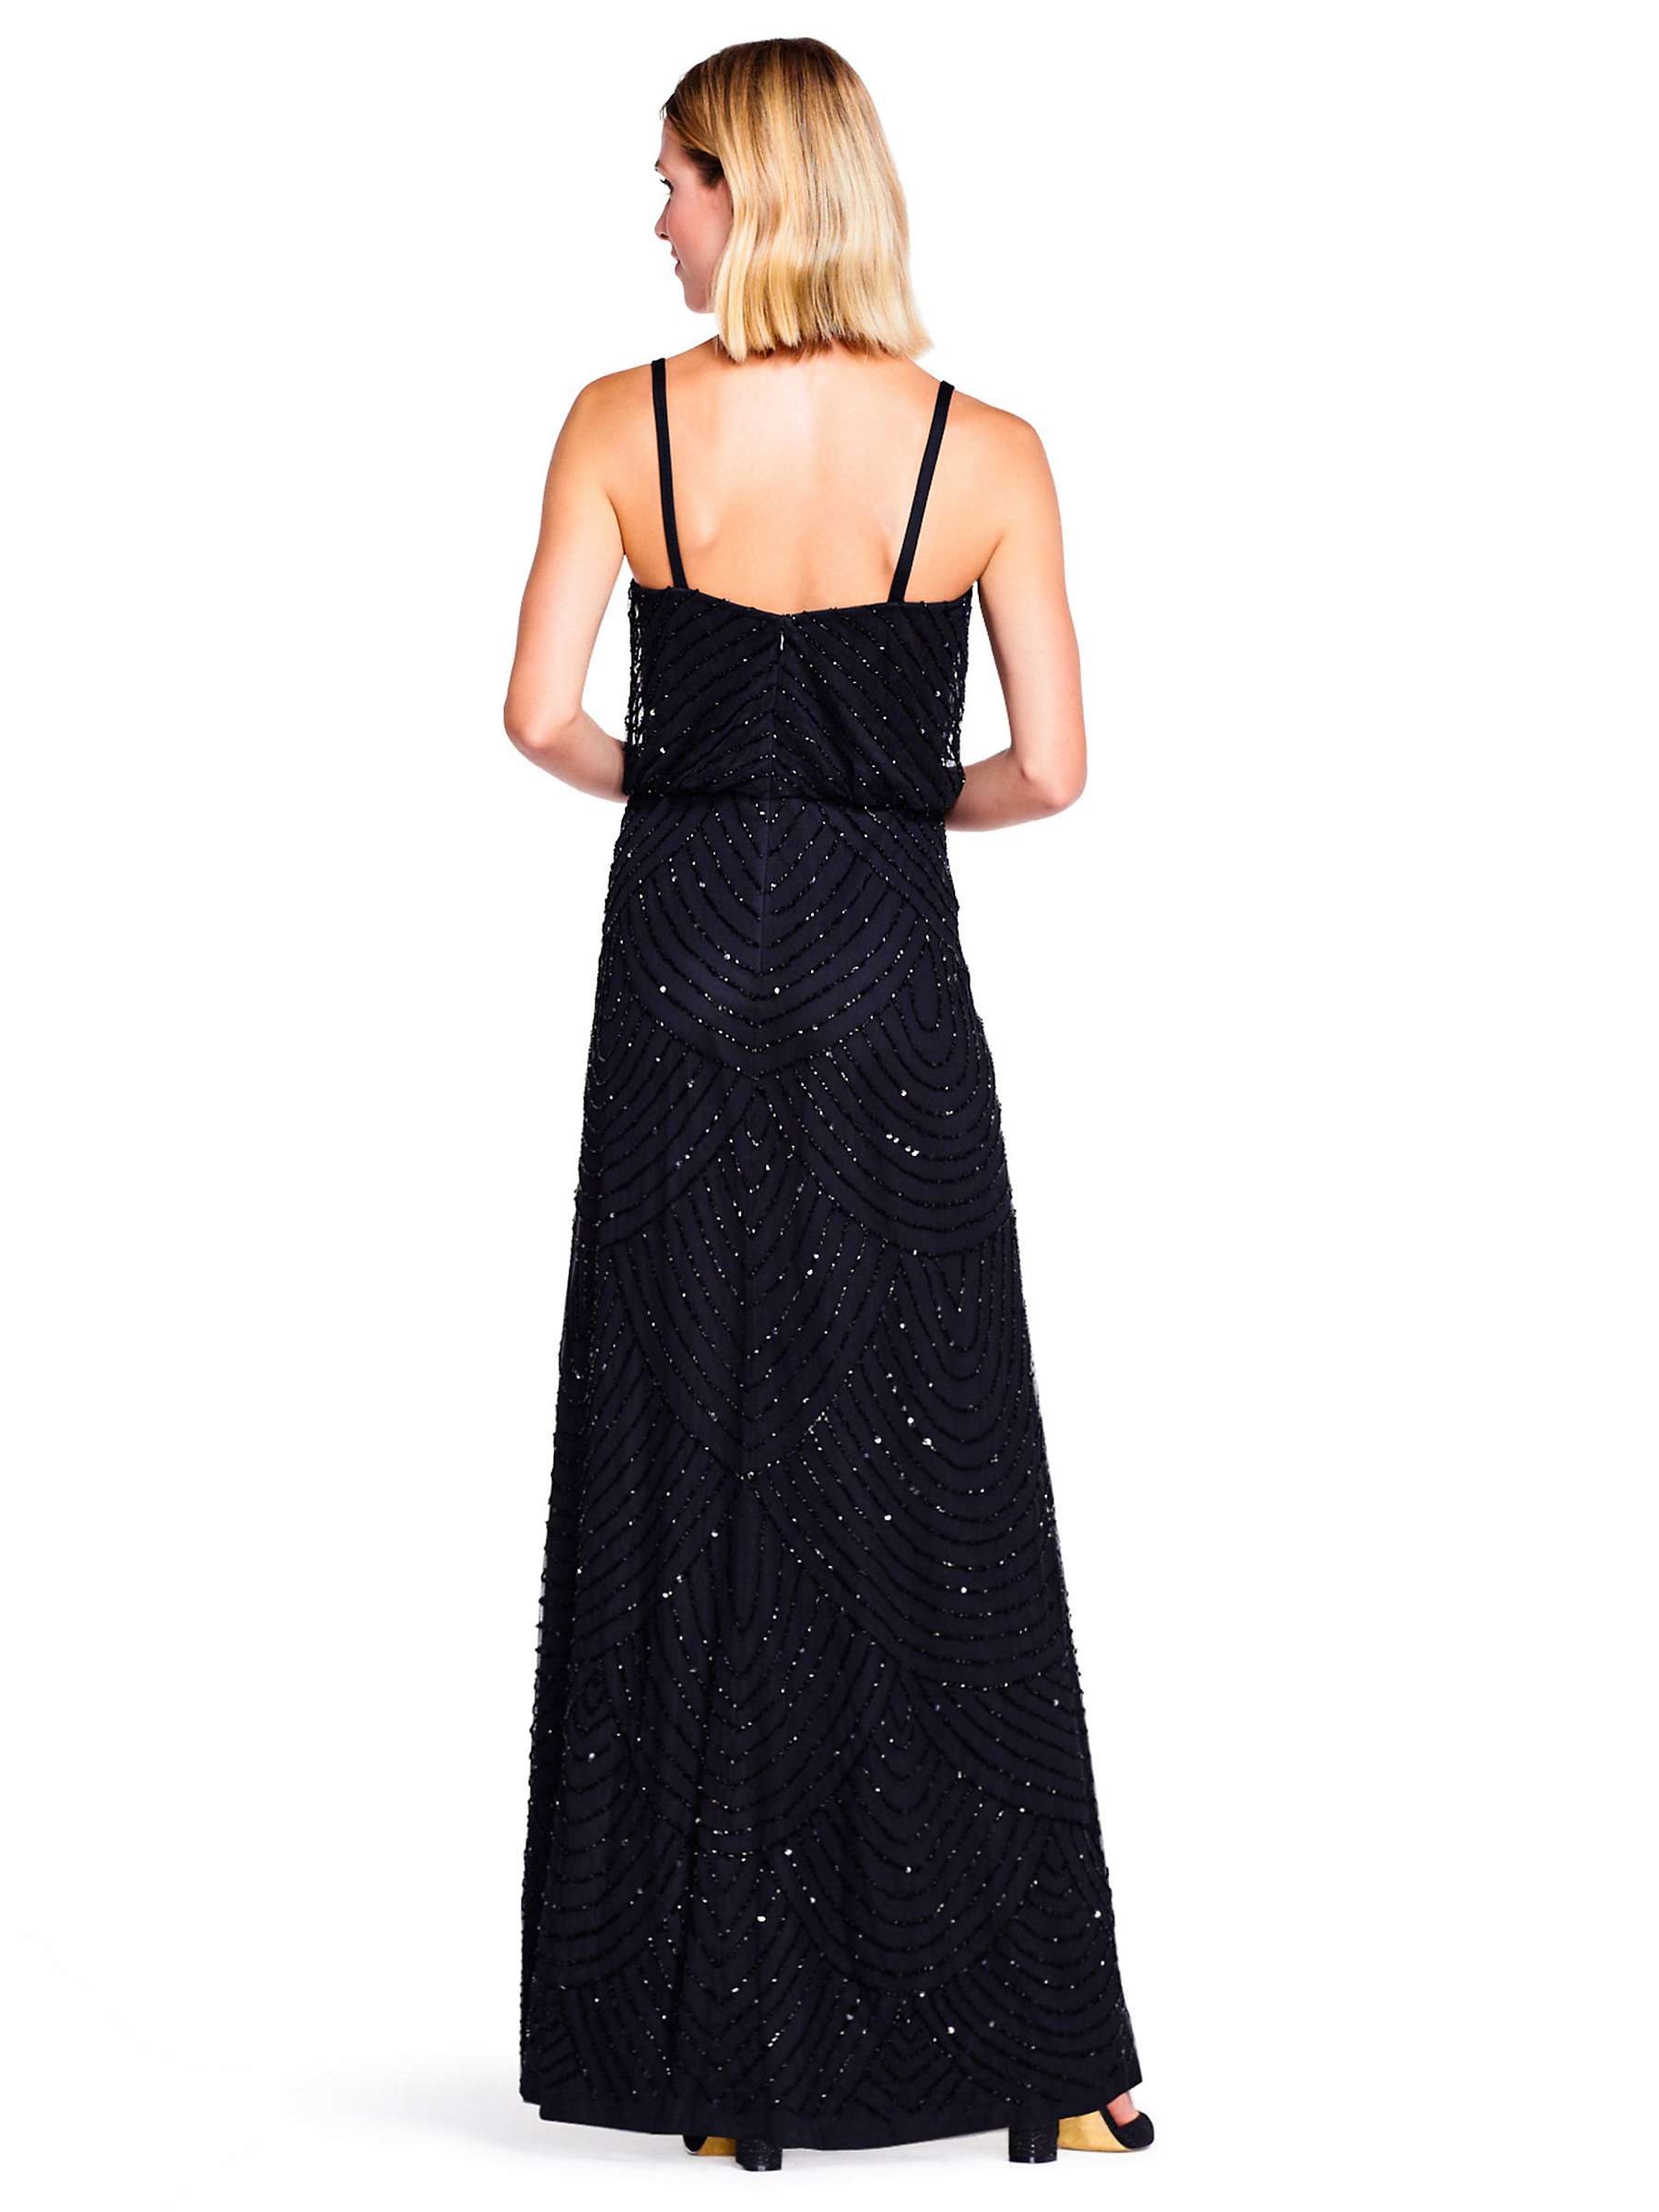 Buy Adrianna Papell Sleeveless Blouson Beaded Gown Online at johnlewis.com